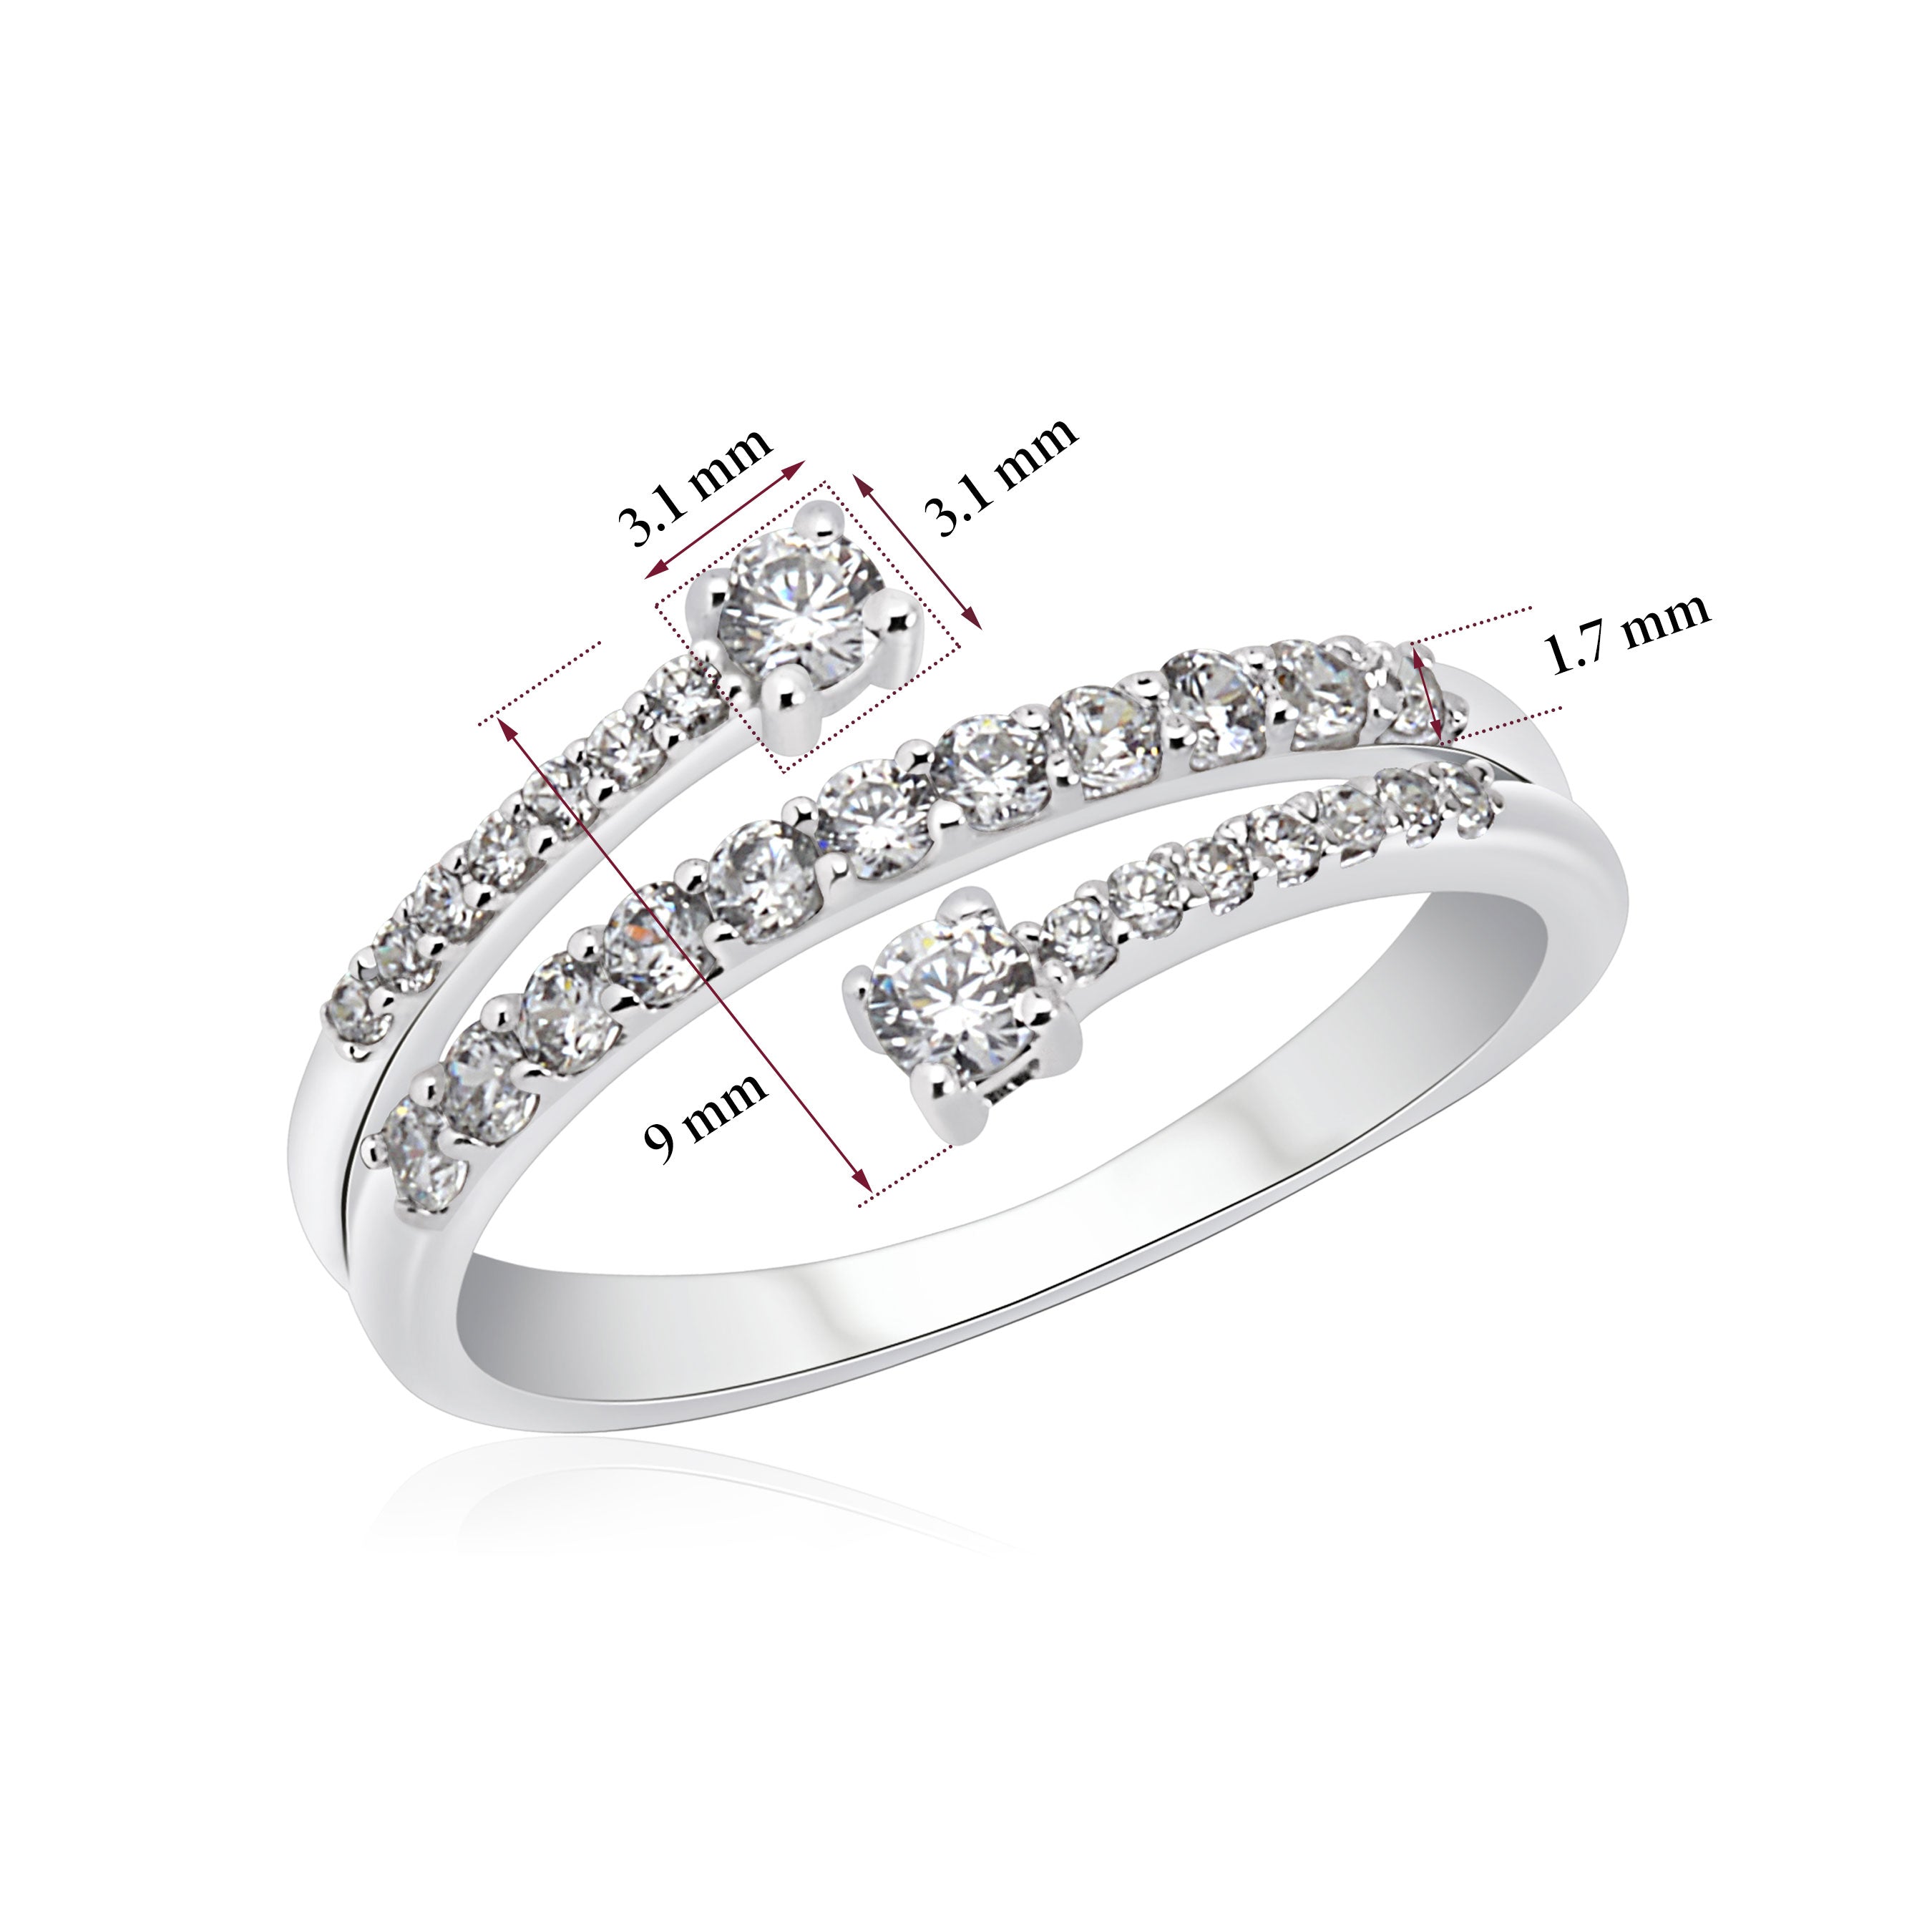 UNICORNJ 14K White Gold CZ Wrap Around Ring with Larger CZ on both Ends Italy